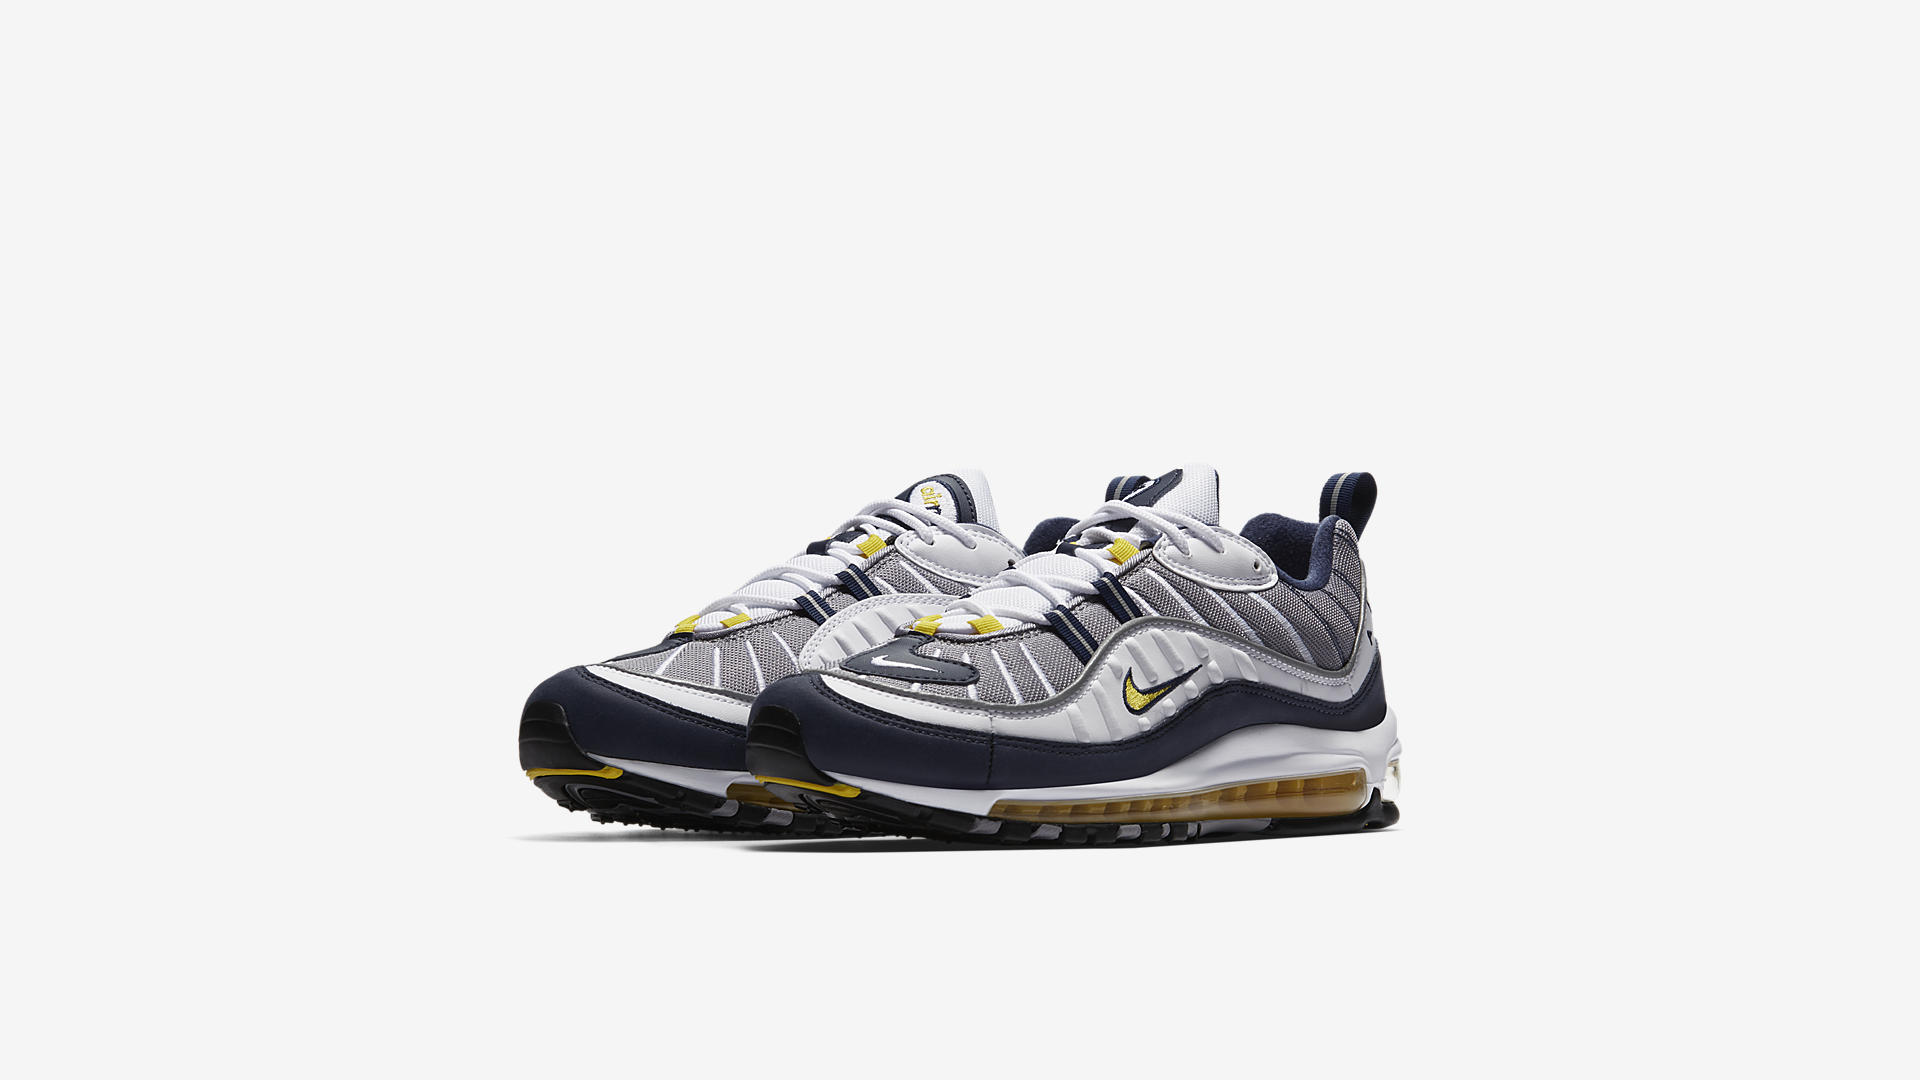 The Nike Air Max 98 'Tour Yellow' Drops Friday - WearTesters